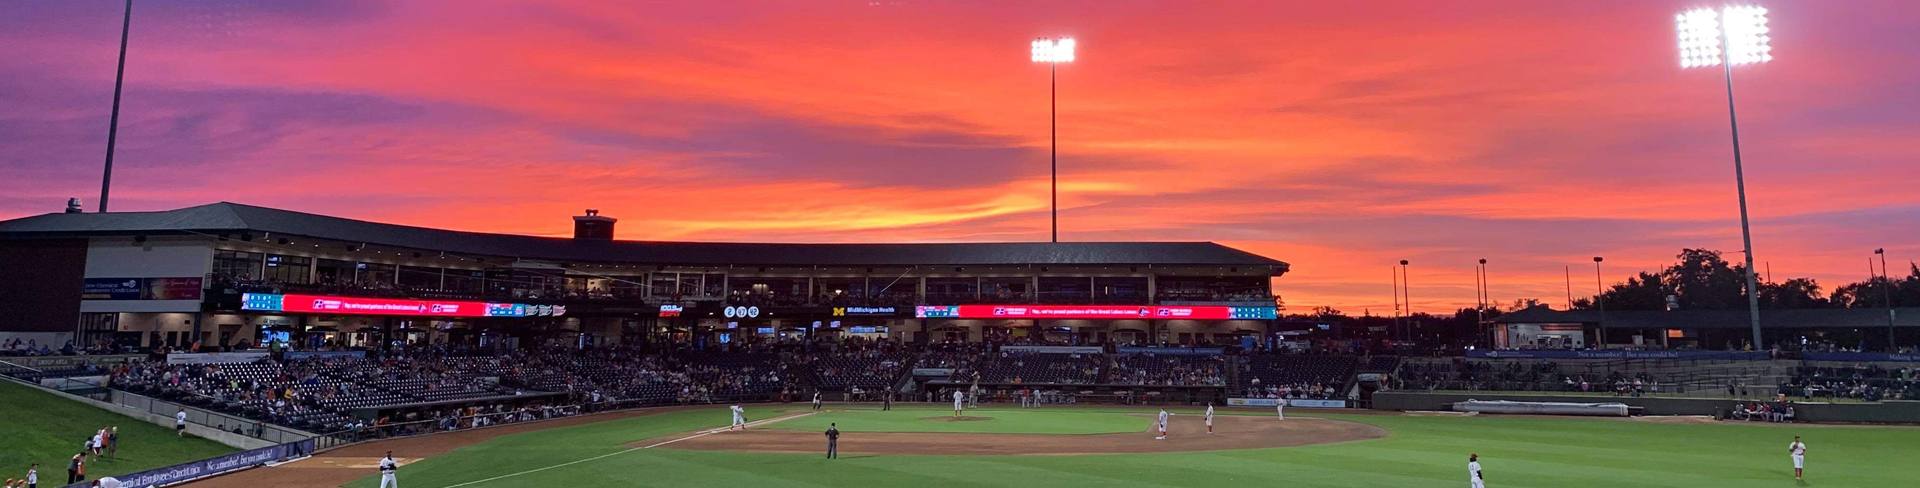 A sunset over Dow Diamond during a Great Lakes Loons baseball game